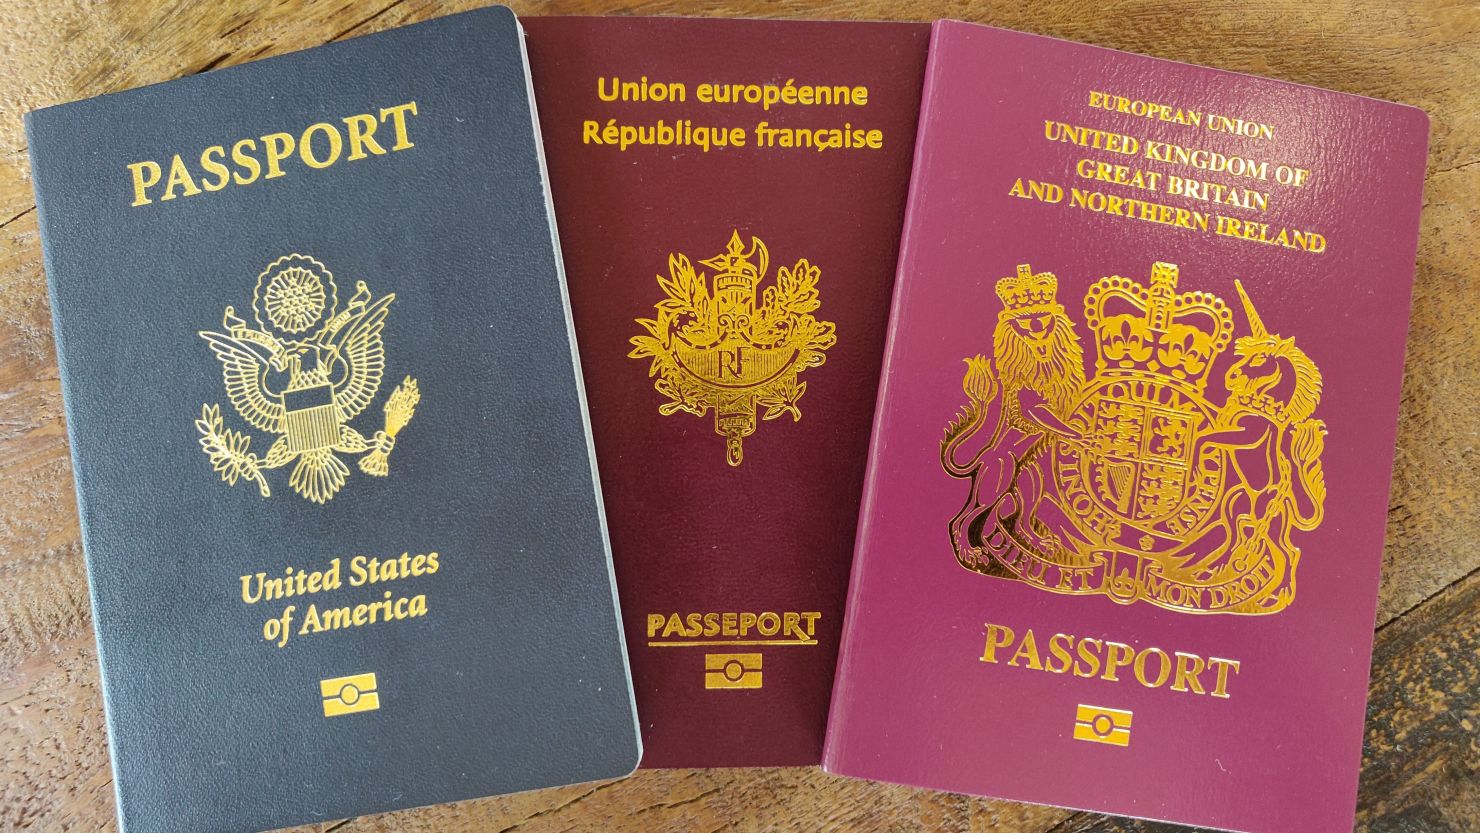 Buying or renewing passports can be expensive, with passports from several countries costing more than $100 each.